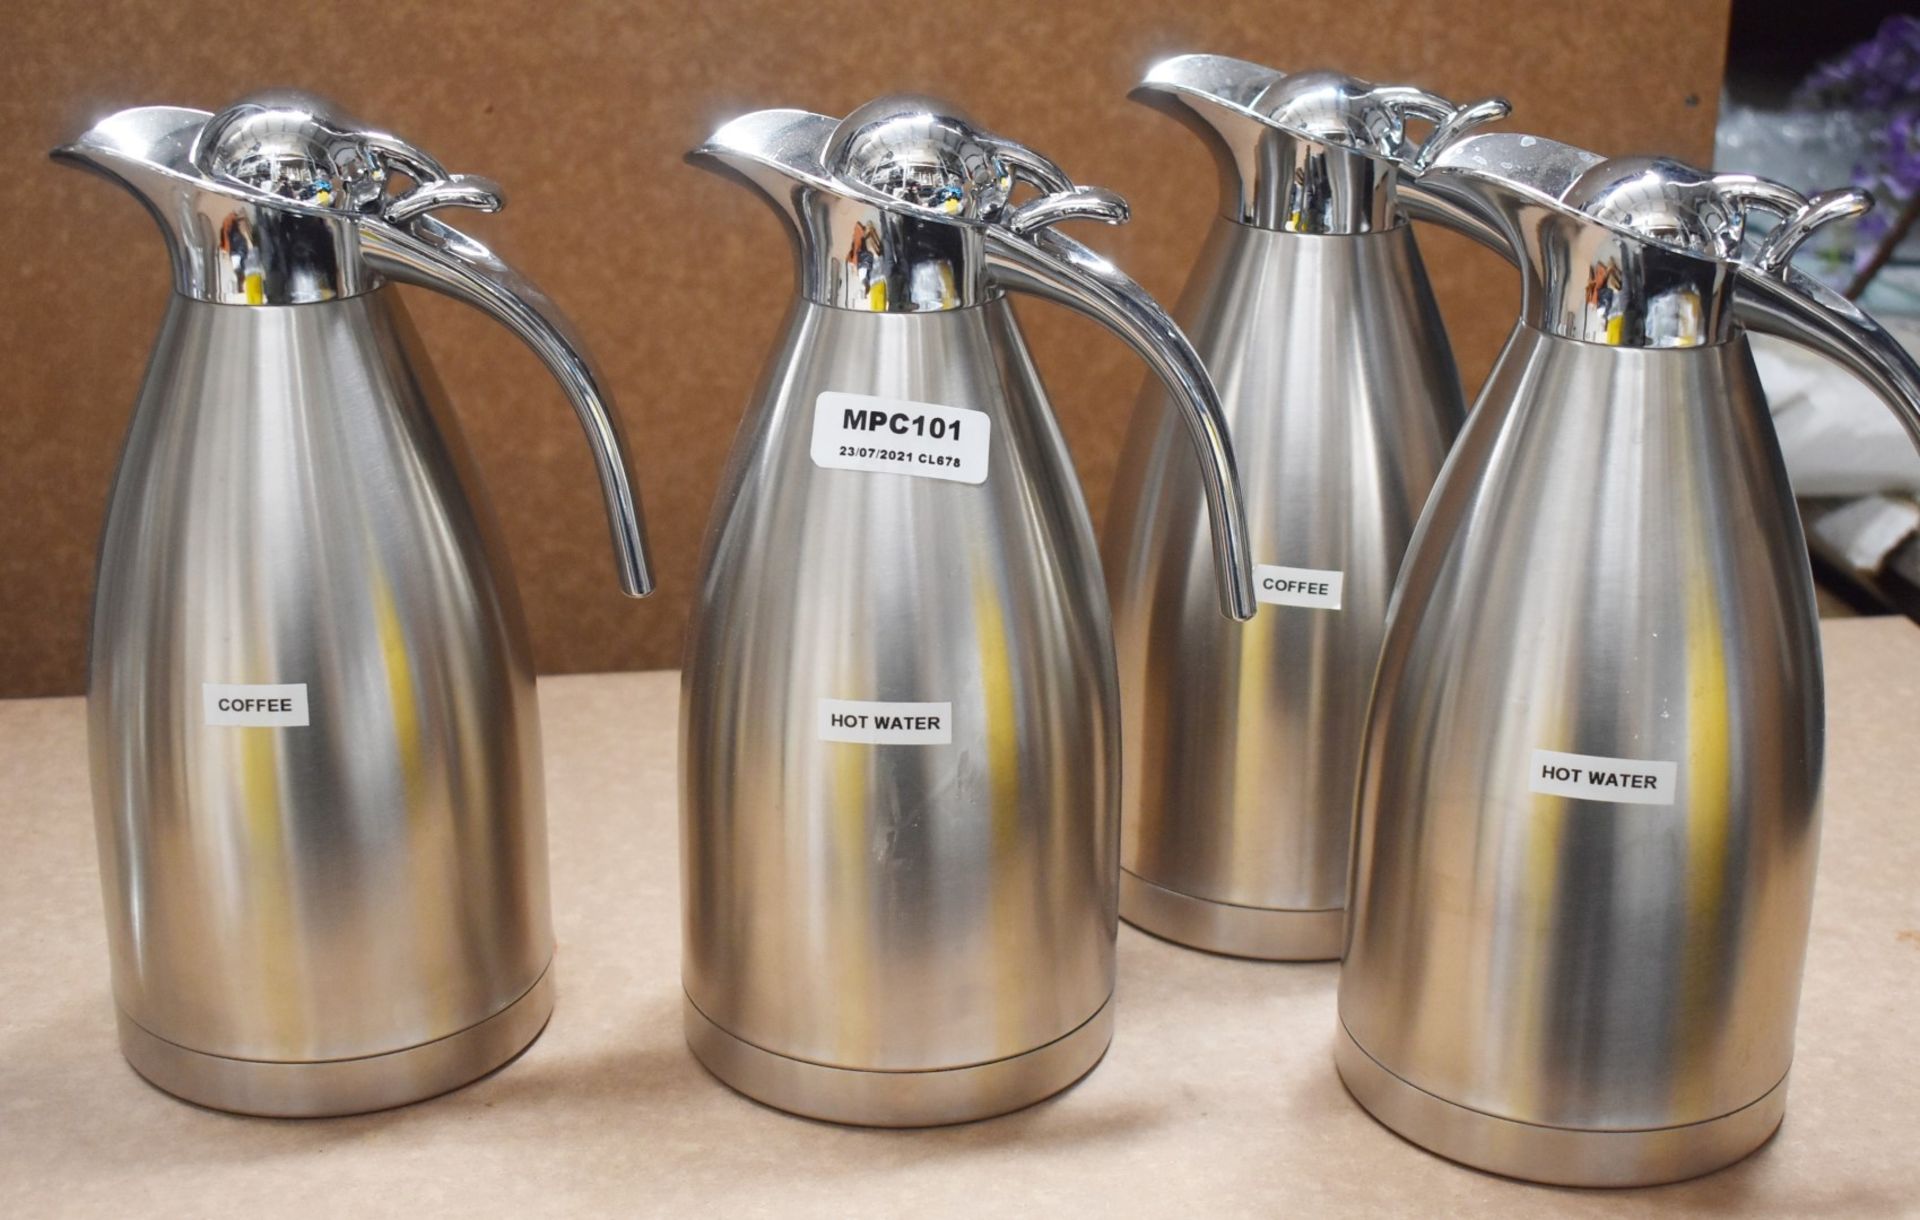 4 x Stainless Steel Boiling Water / Coffee Jug Dispensers - Ref: MPC101 P1 - CL678 - Location: